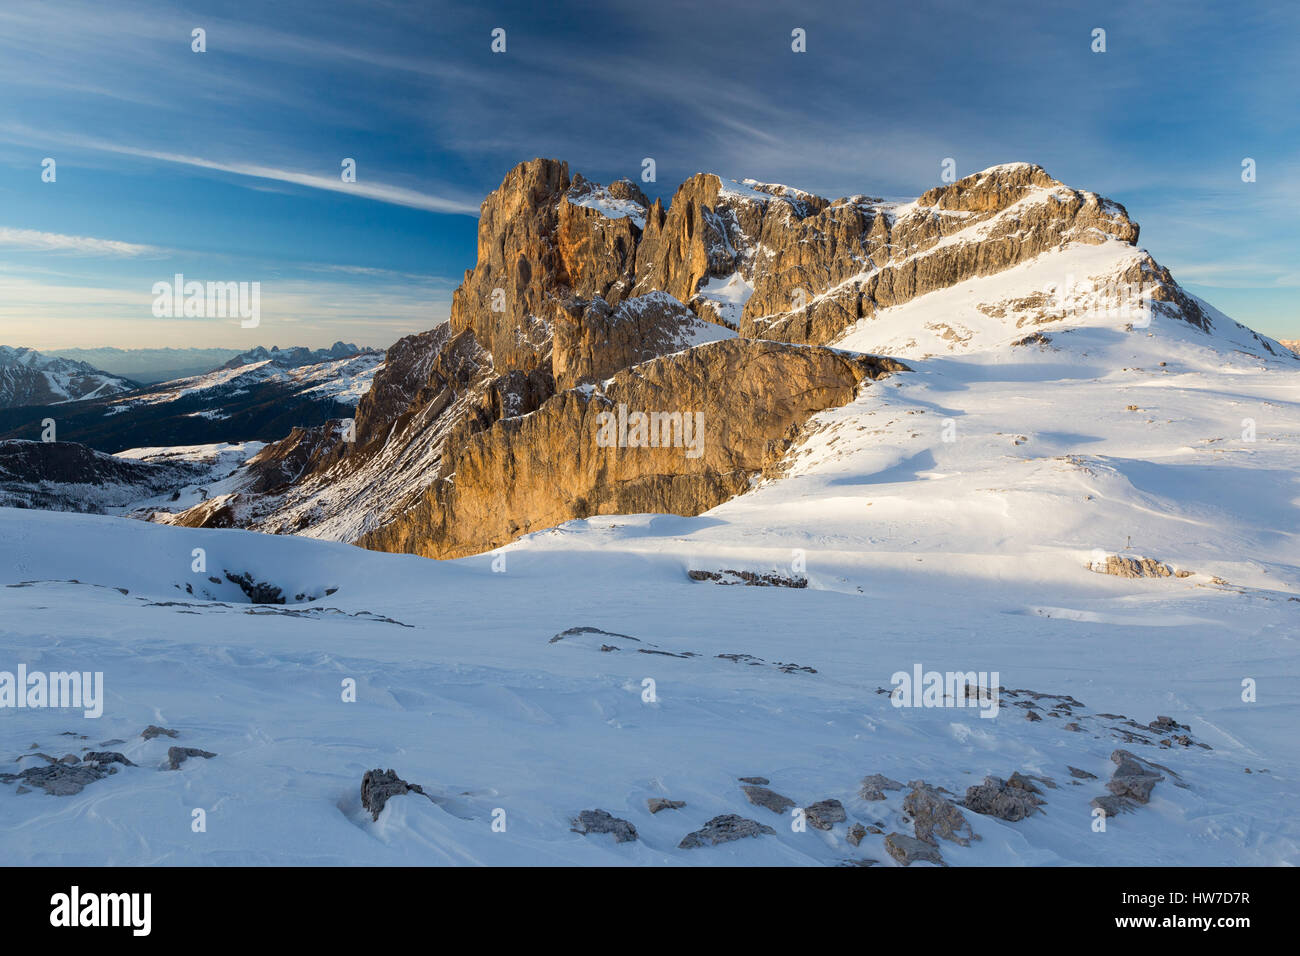 The Pale di San Martino mountain group at sunset. The Dolomites of Trentino. Italian Alps. Europe. Stock Photo